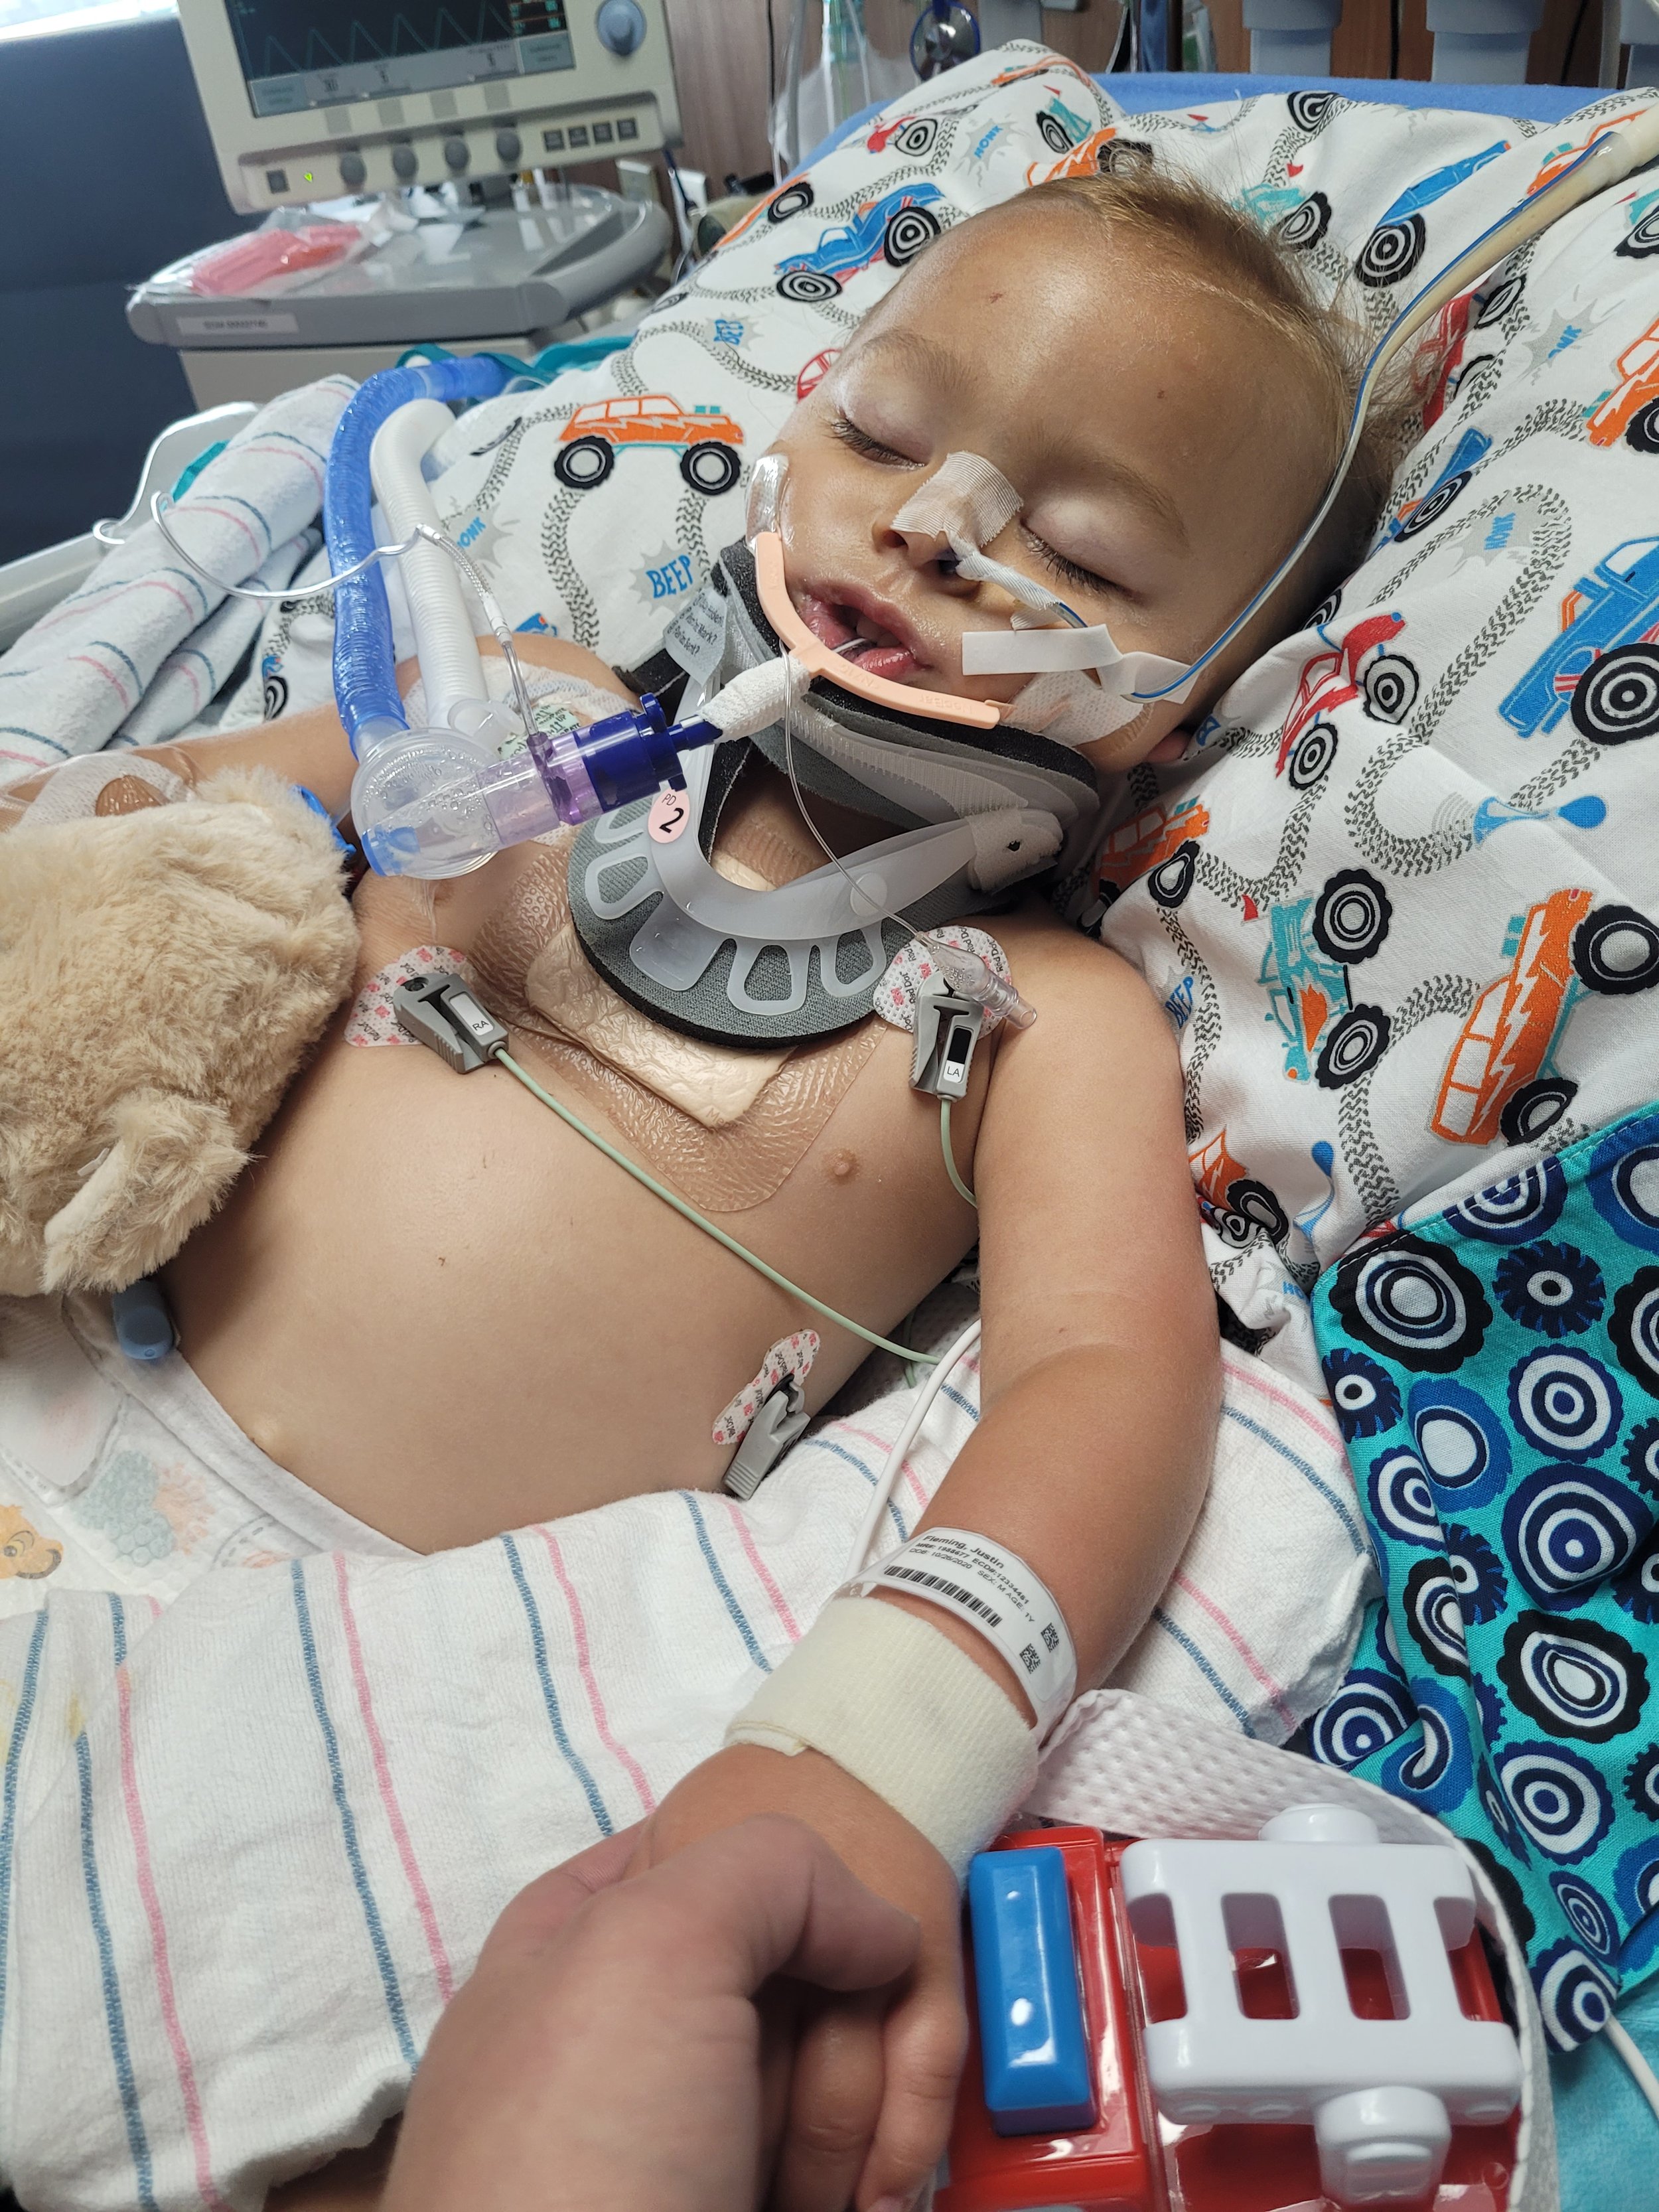  Asher was placed in a medically induced coma to allow his brain time to rest and heal. 